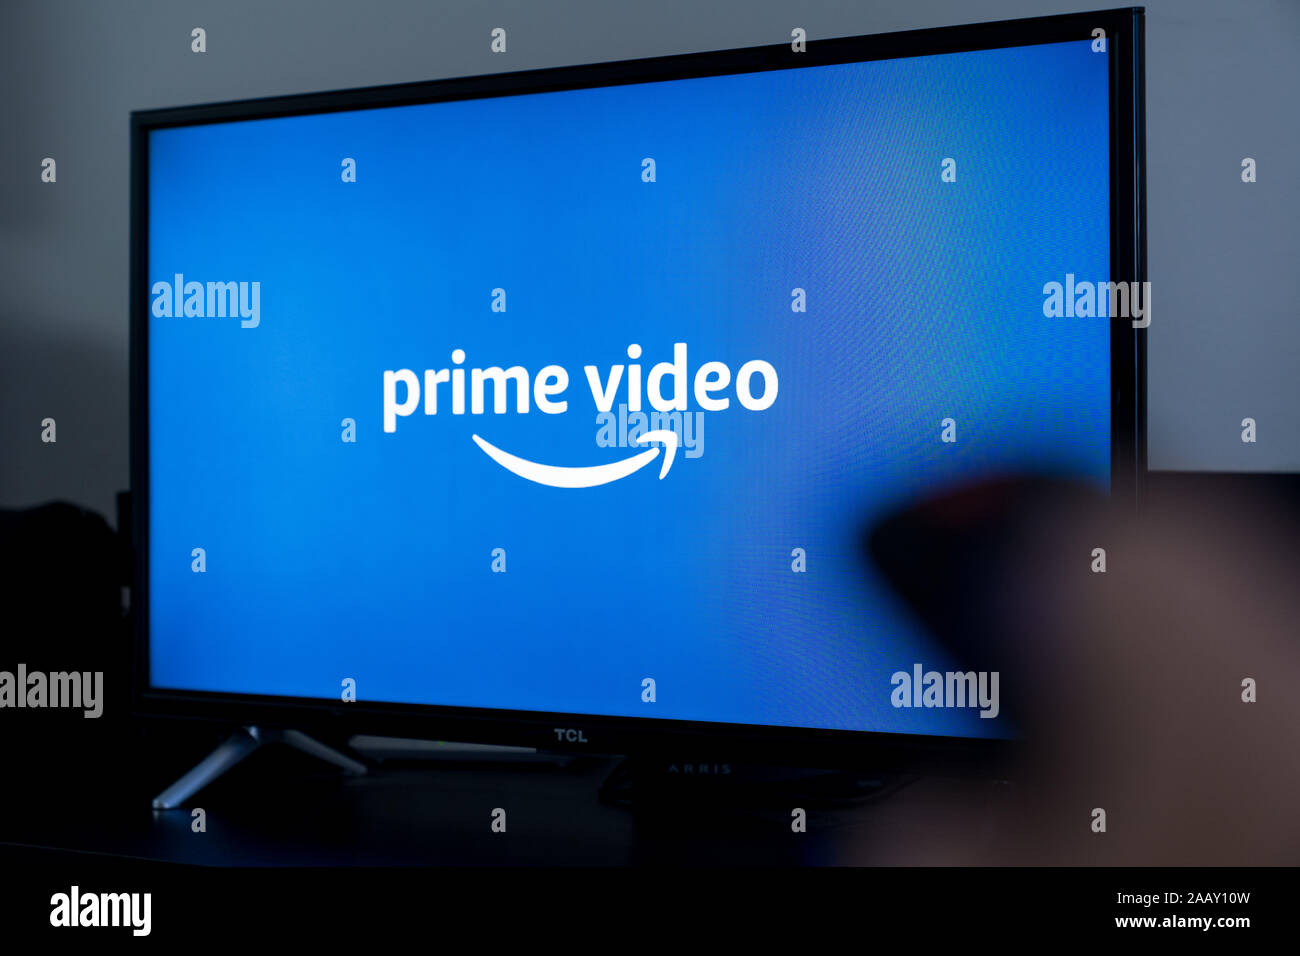 Online video streaming Prime Video screen on TV Stock Photo